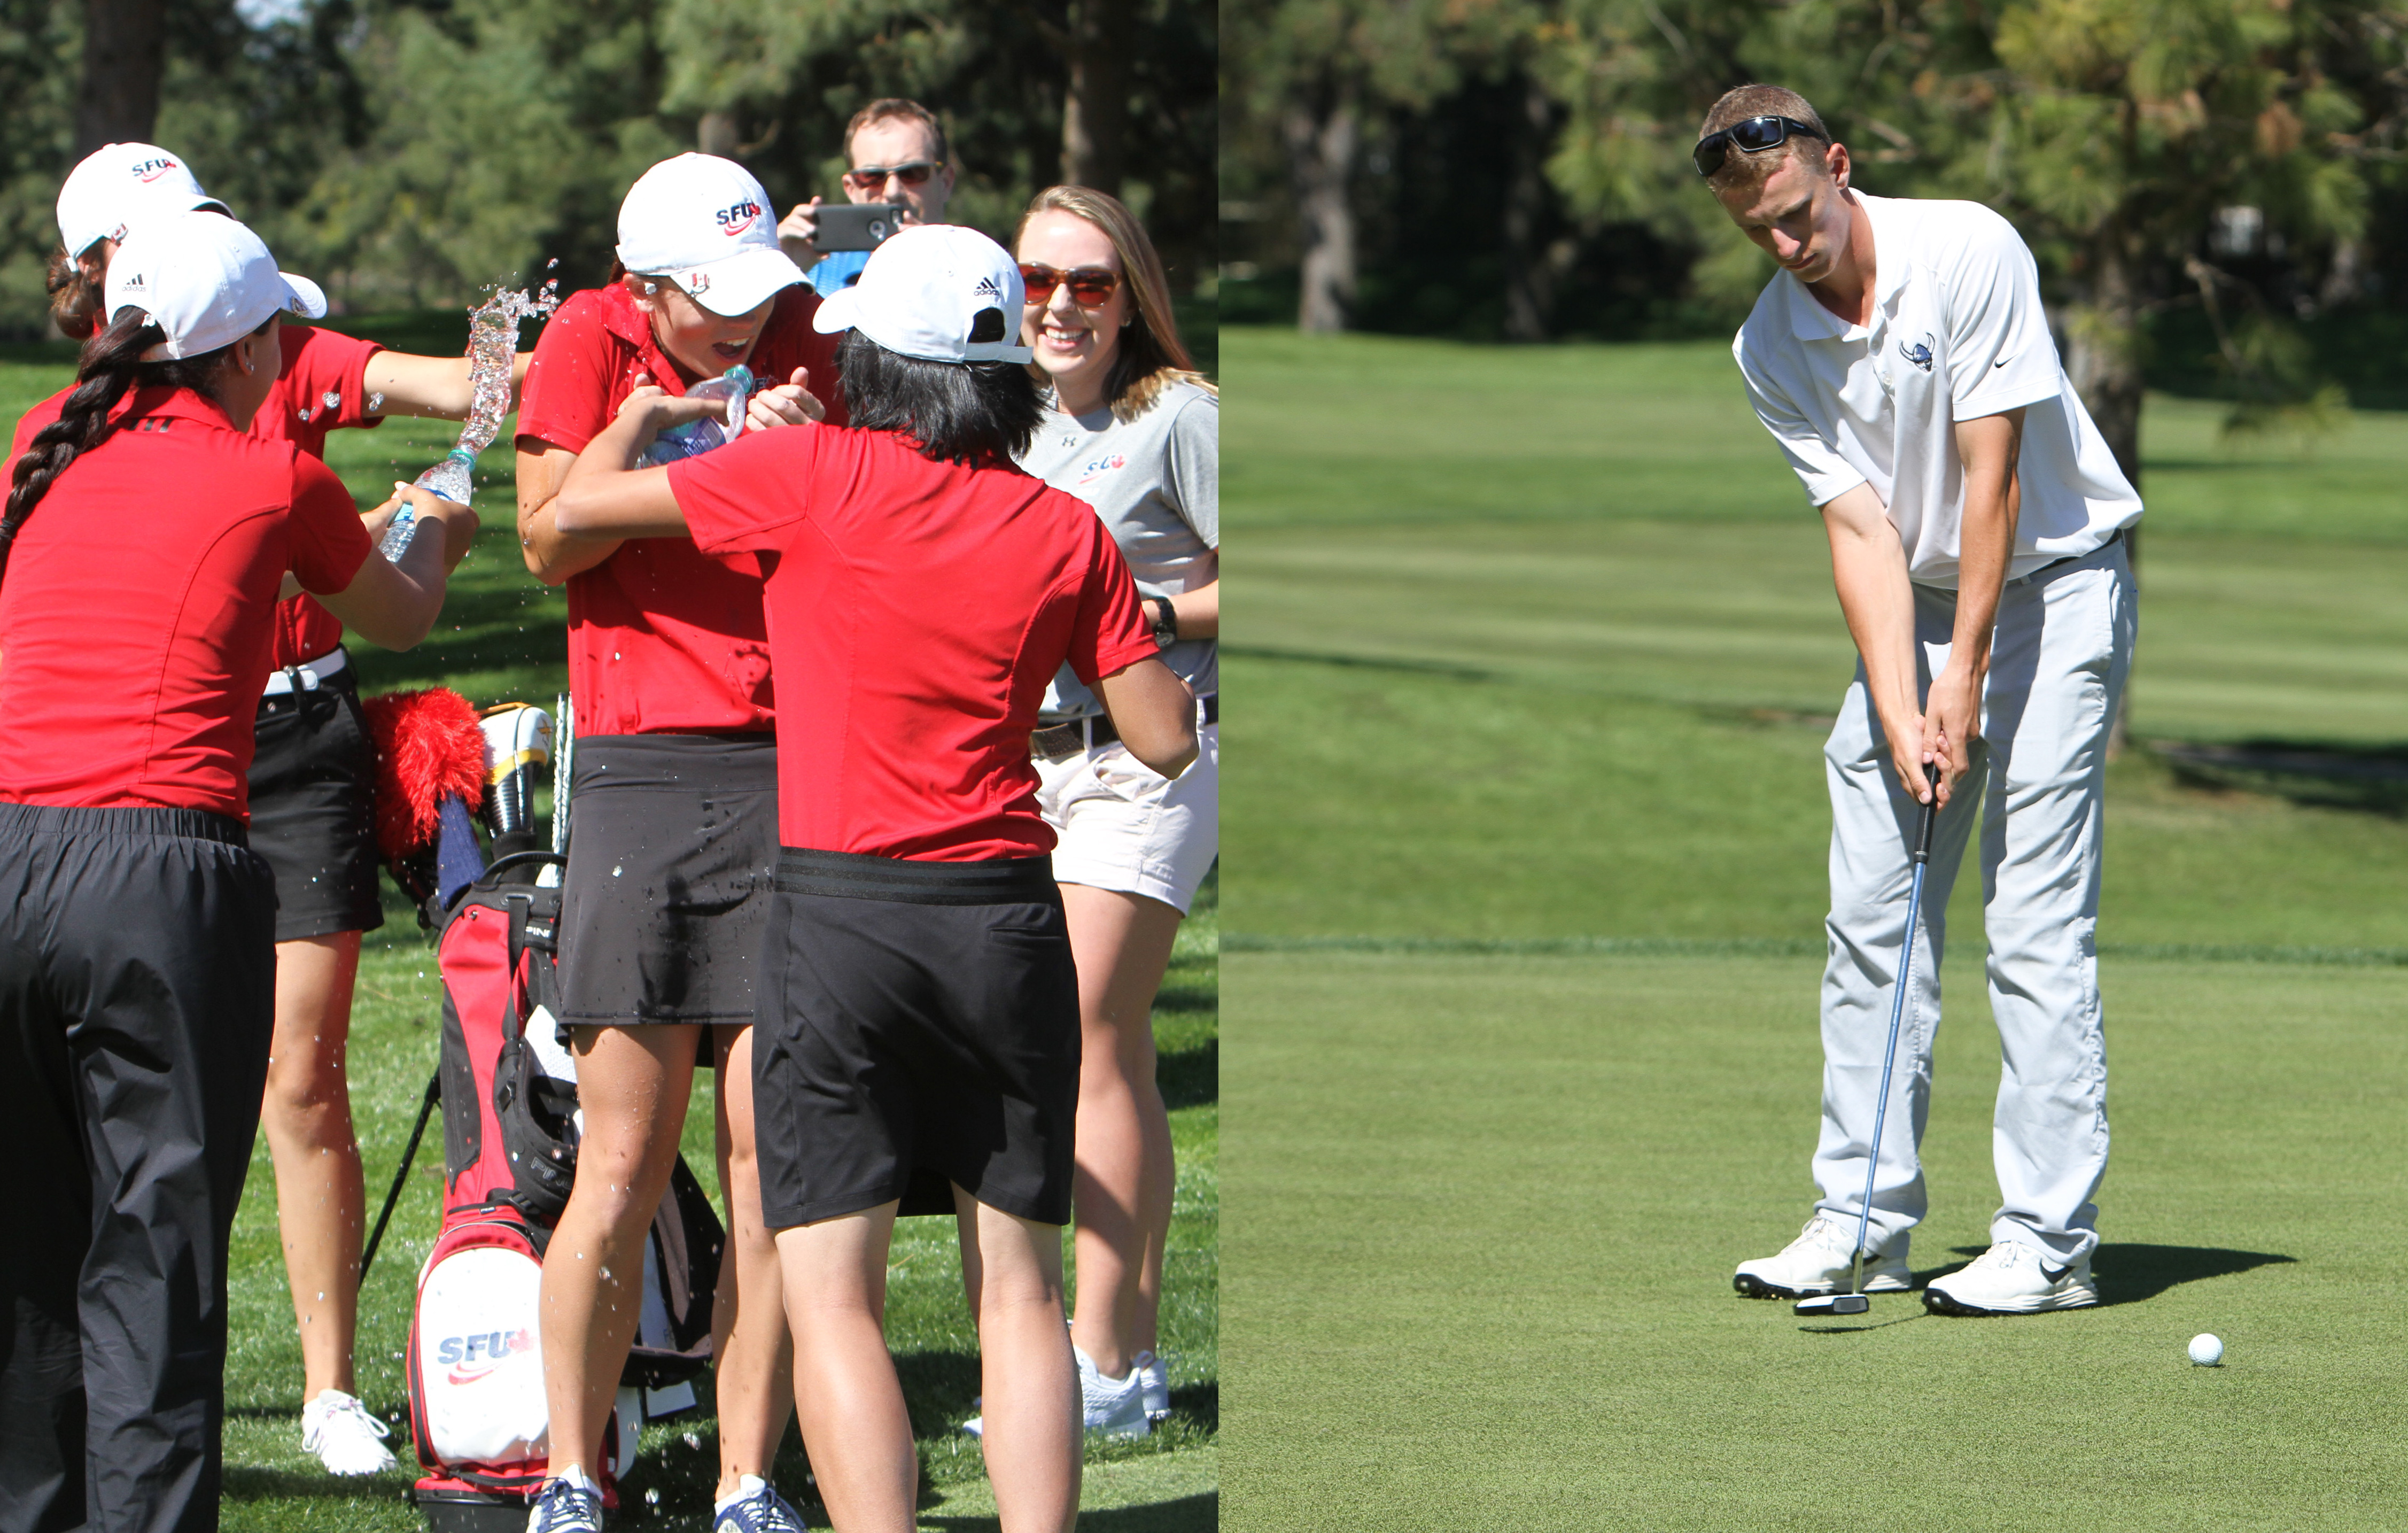 The Simon Fraser women's golf team won its first GNAC title while the Western Washington men's golf team claimed its seventh.